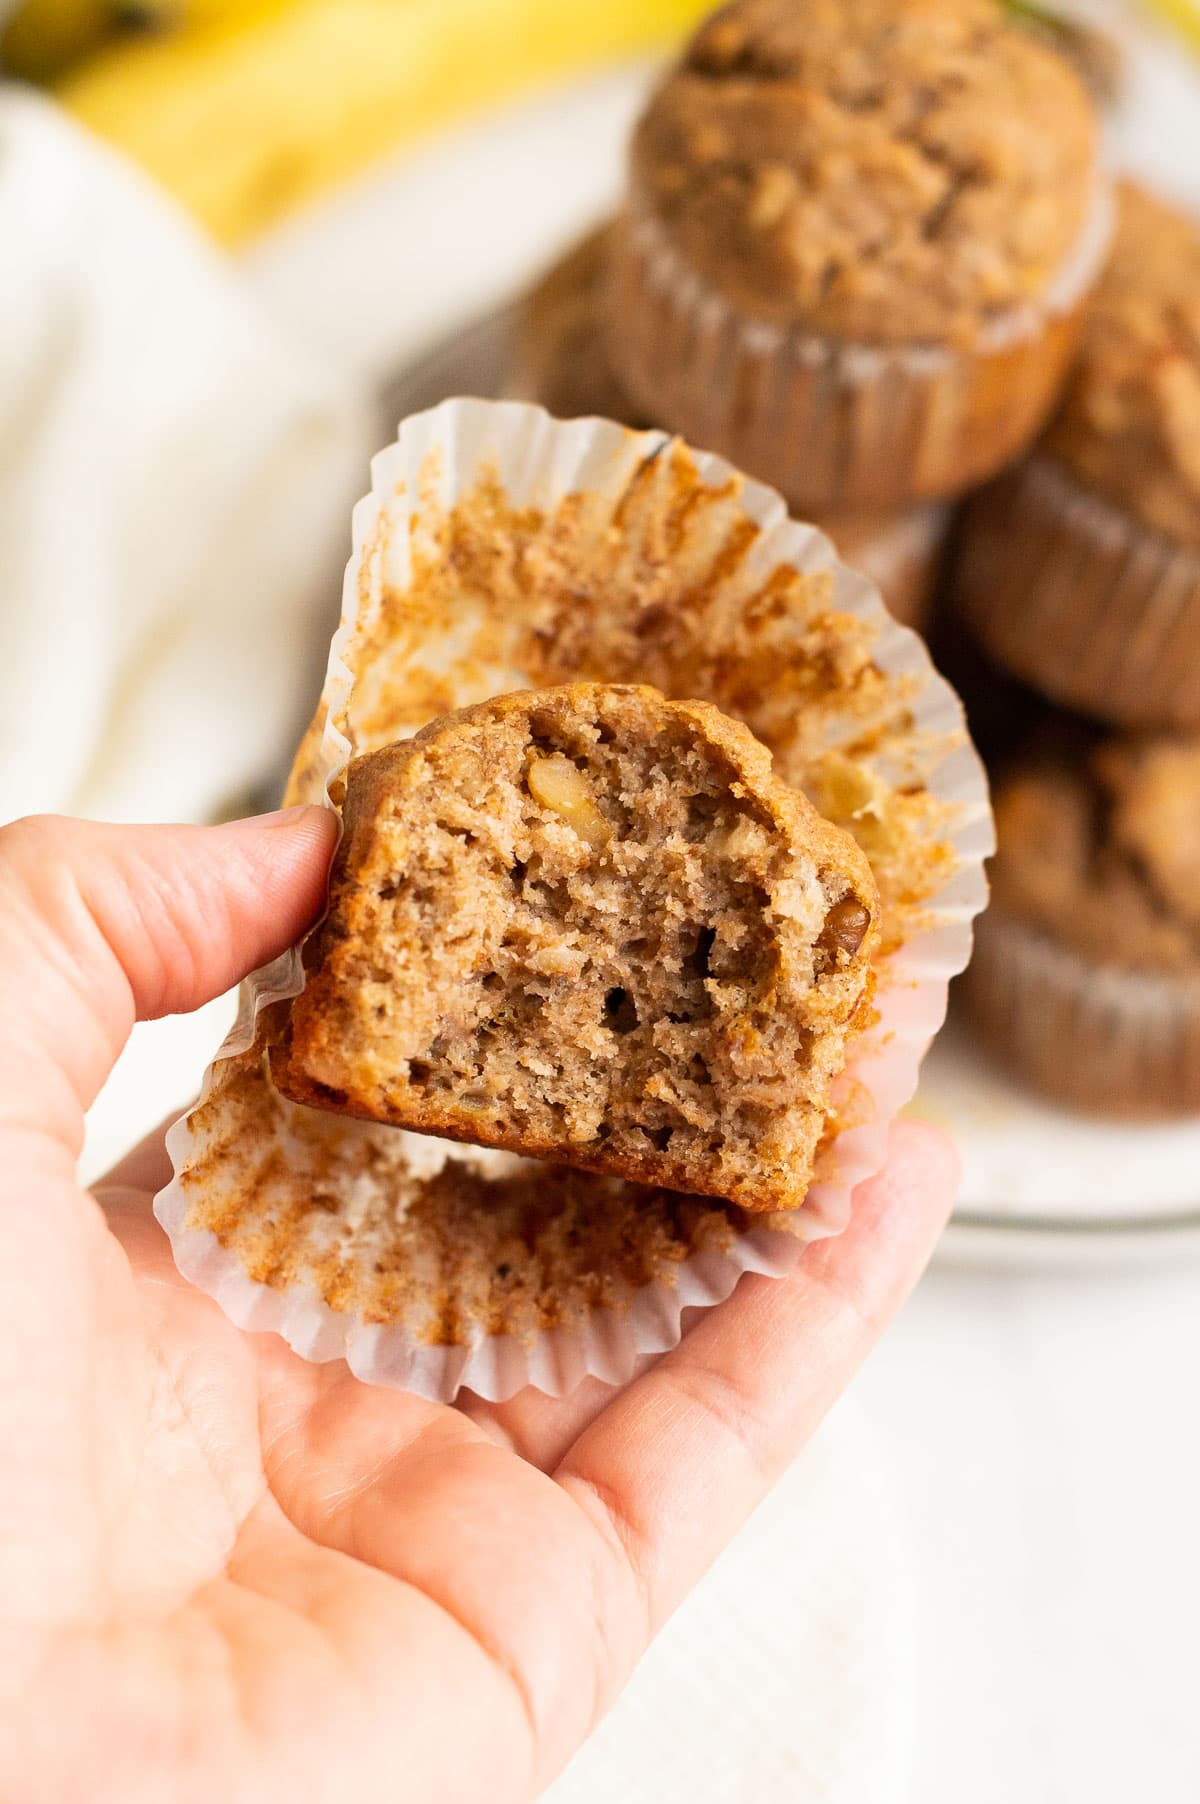 Person holding a banana muffin  showing texture inside.